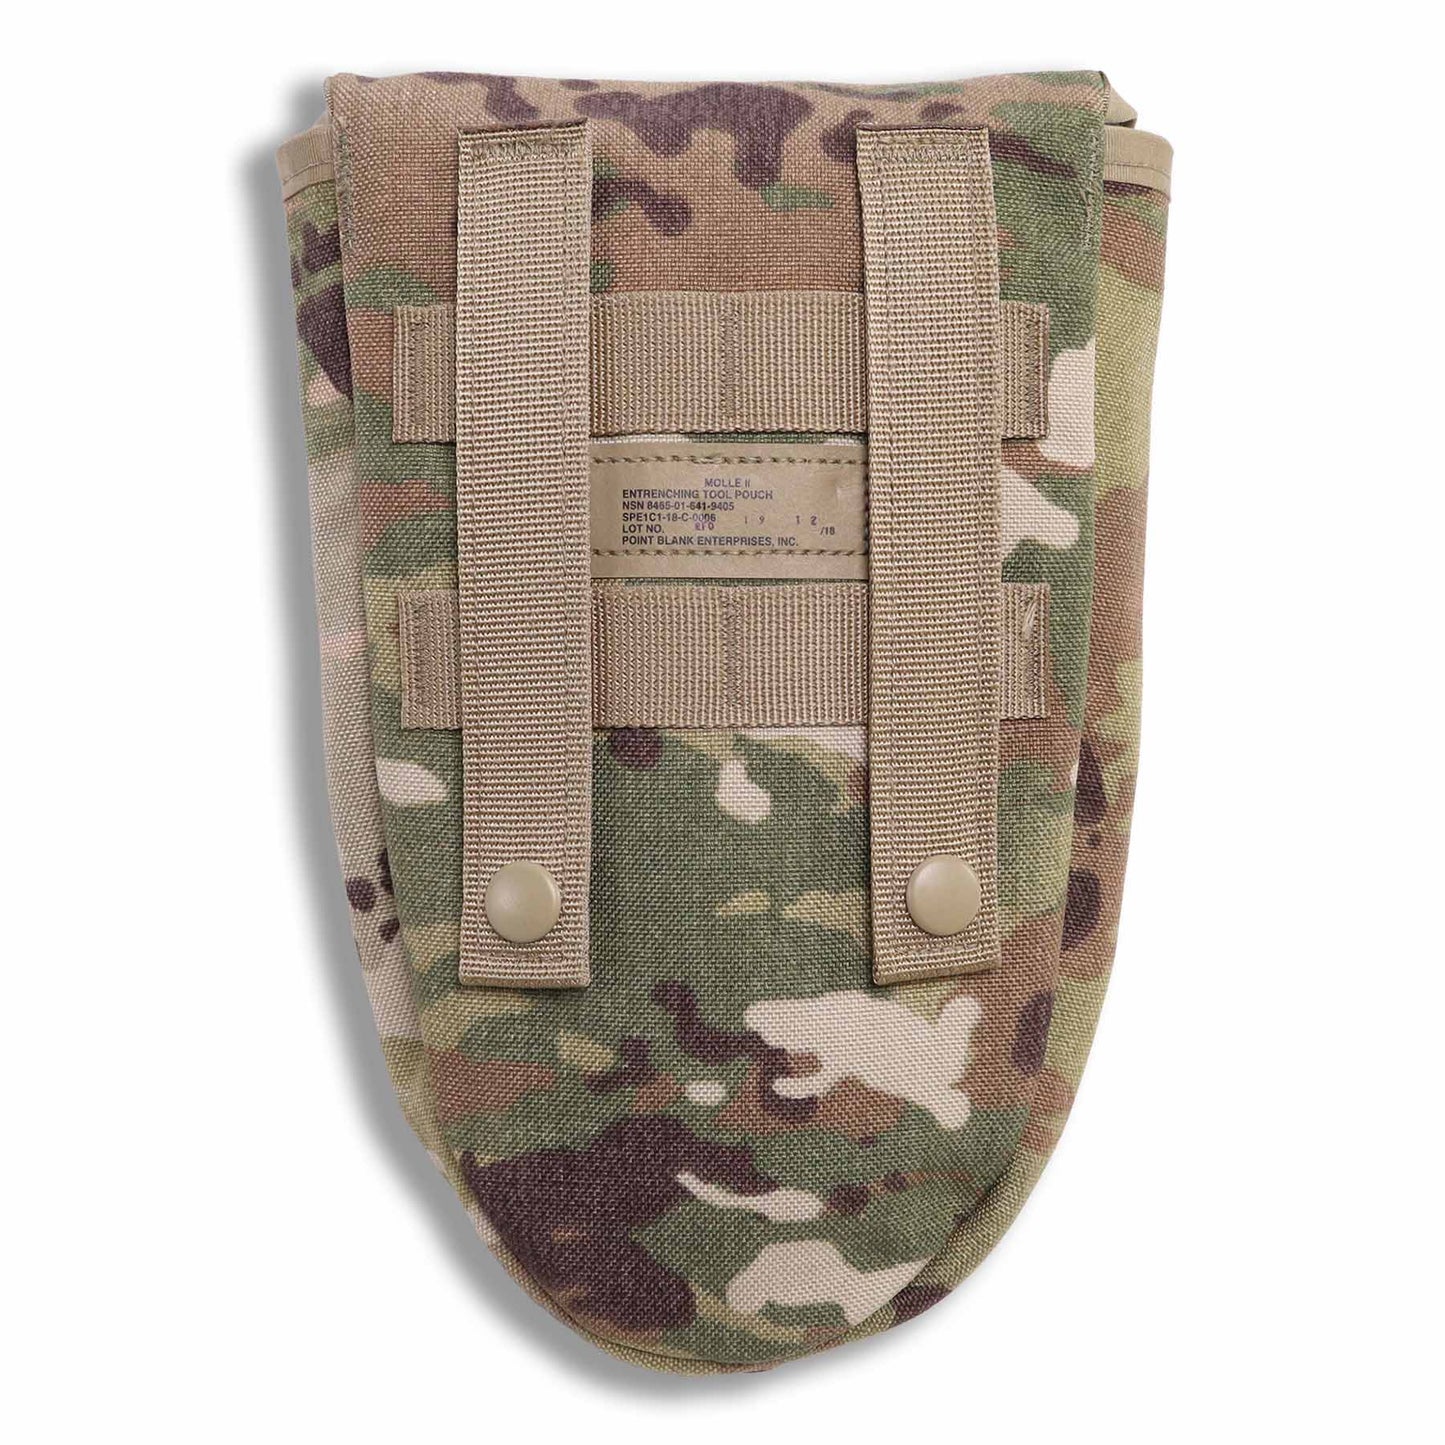 USGI US Army MOLLE II Entrenching Tool Carrier E-Tool Pouch - OCP (SURPLUS)